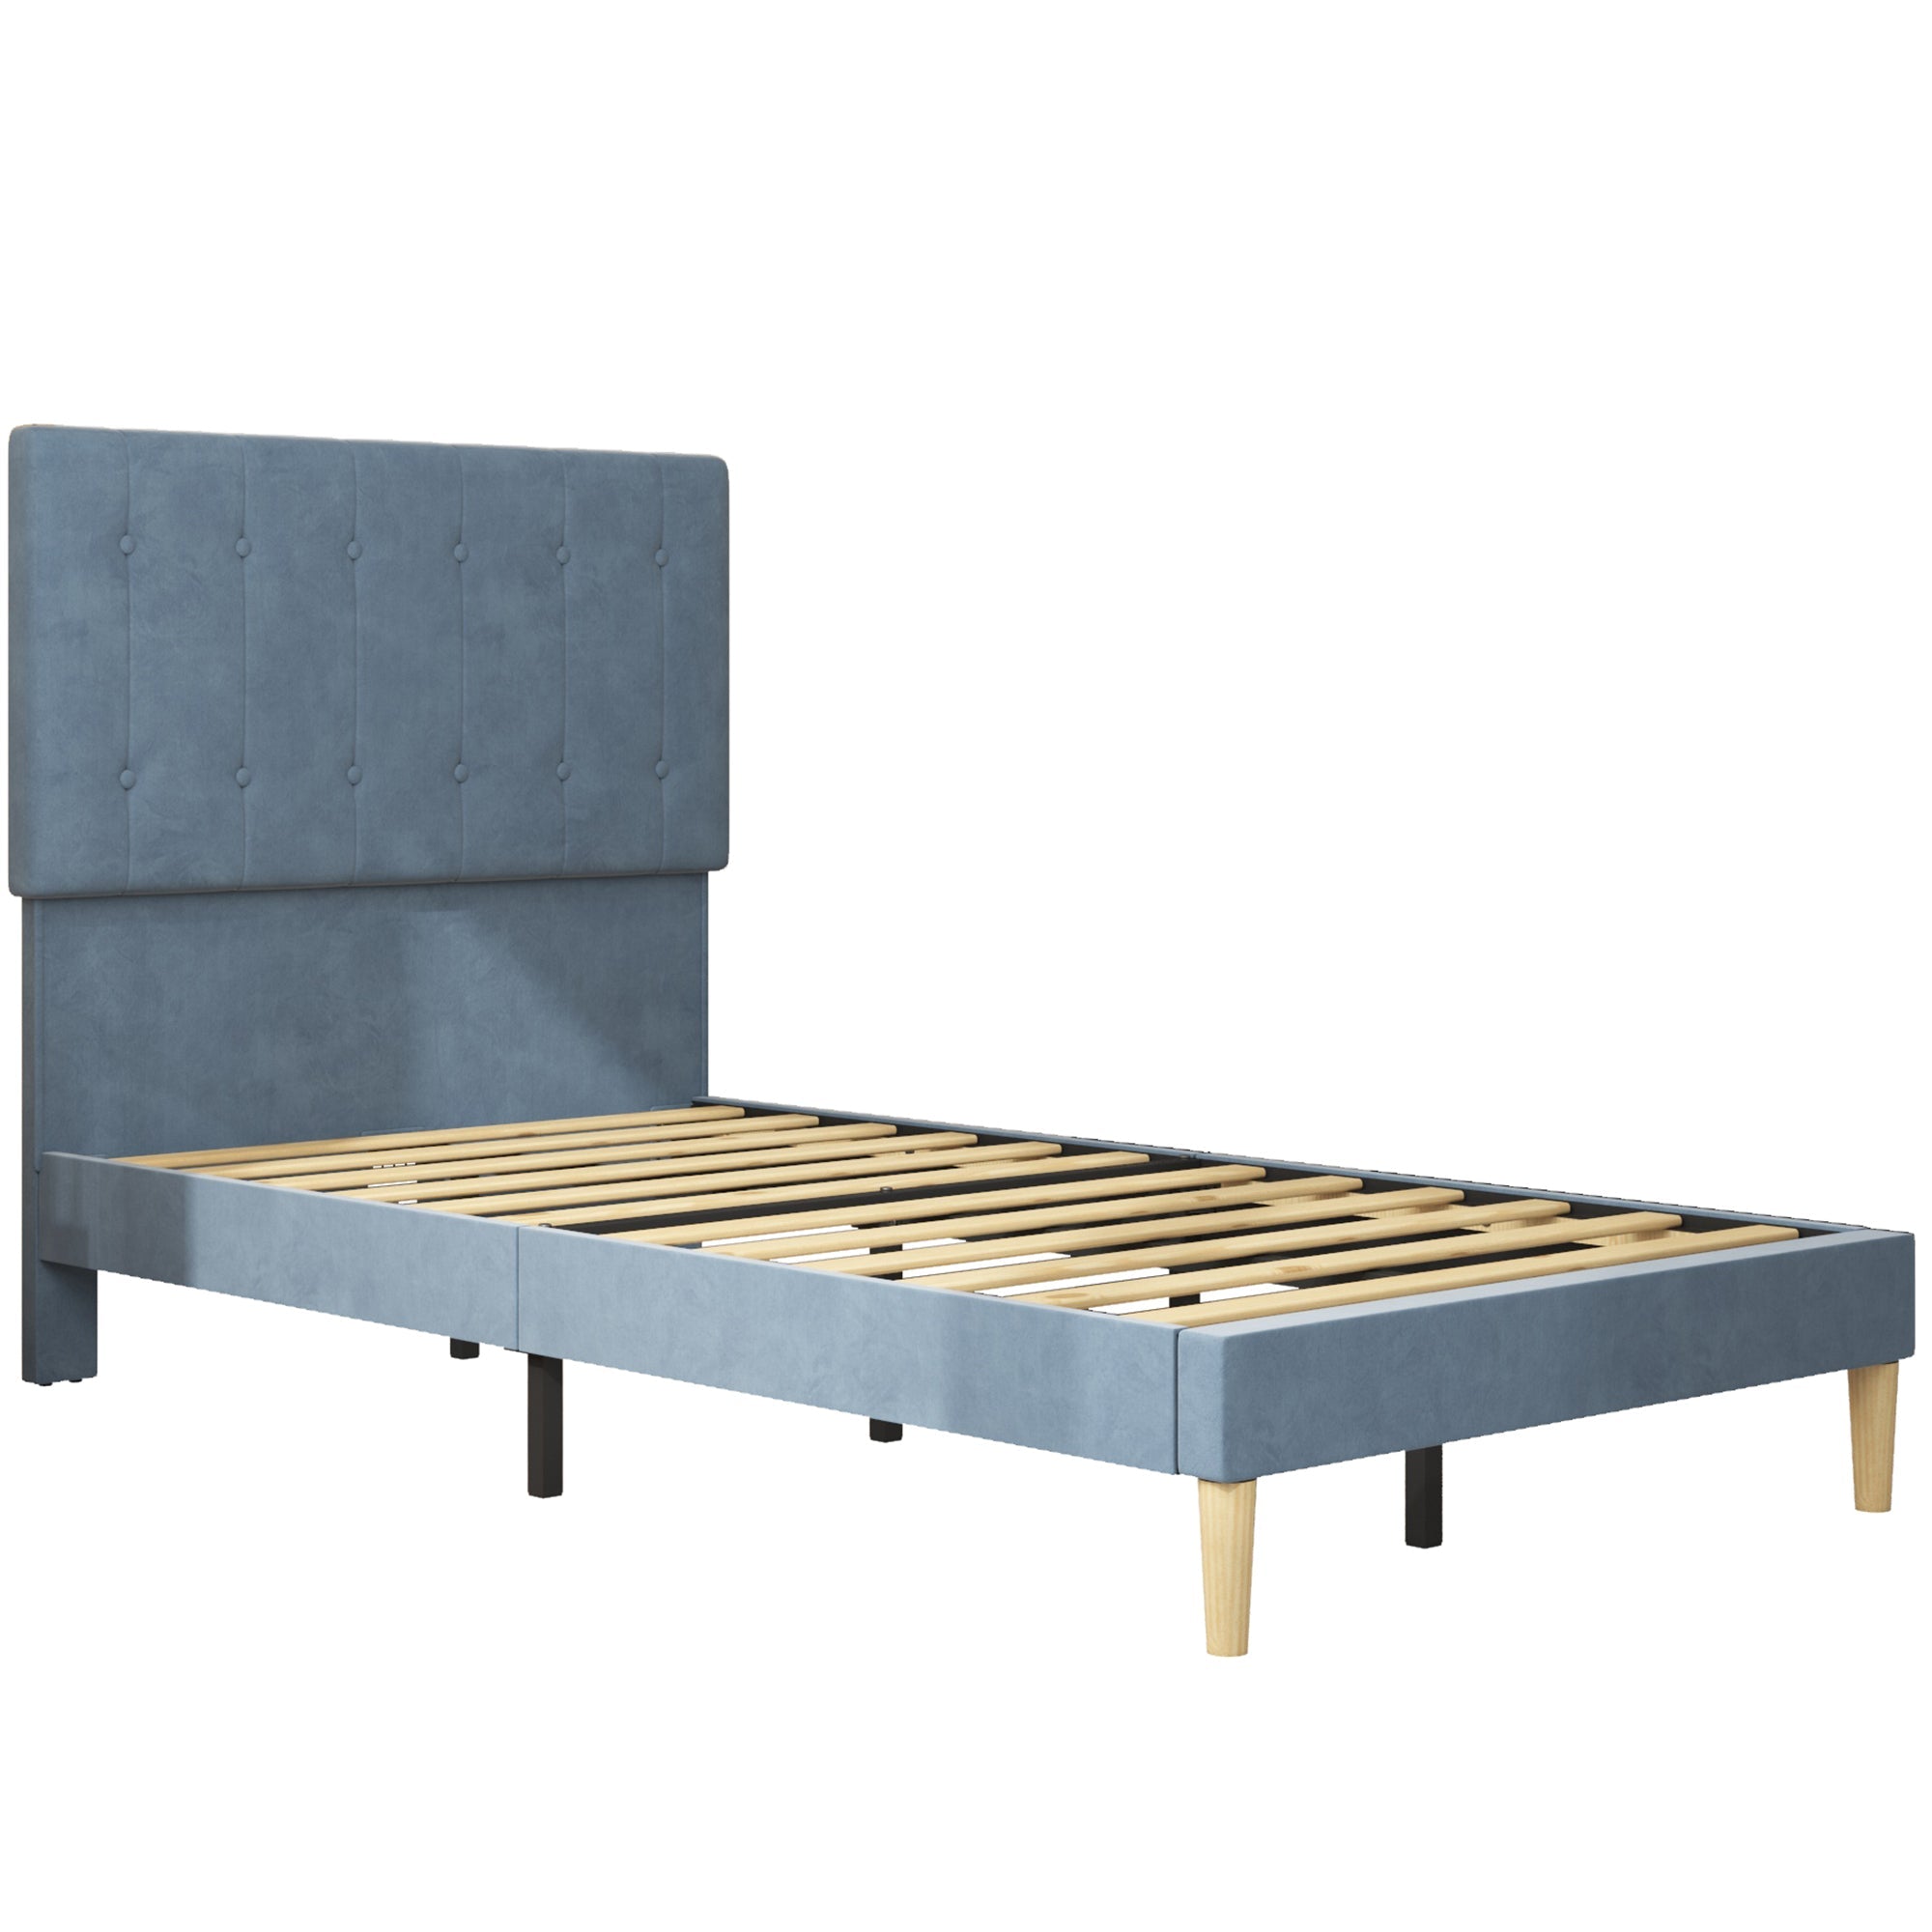 uhomepro Modern Upholstered Platform Twin Bed Frame with Headboard, Heavy Duty Blue Twin Bed Frame with Wood Slat Support, Mattress Foundation for Adults Kids, No Box Spring Needed